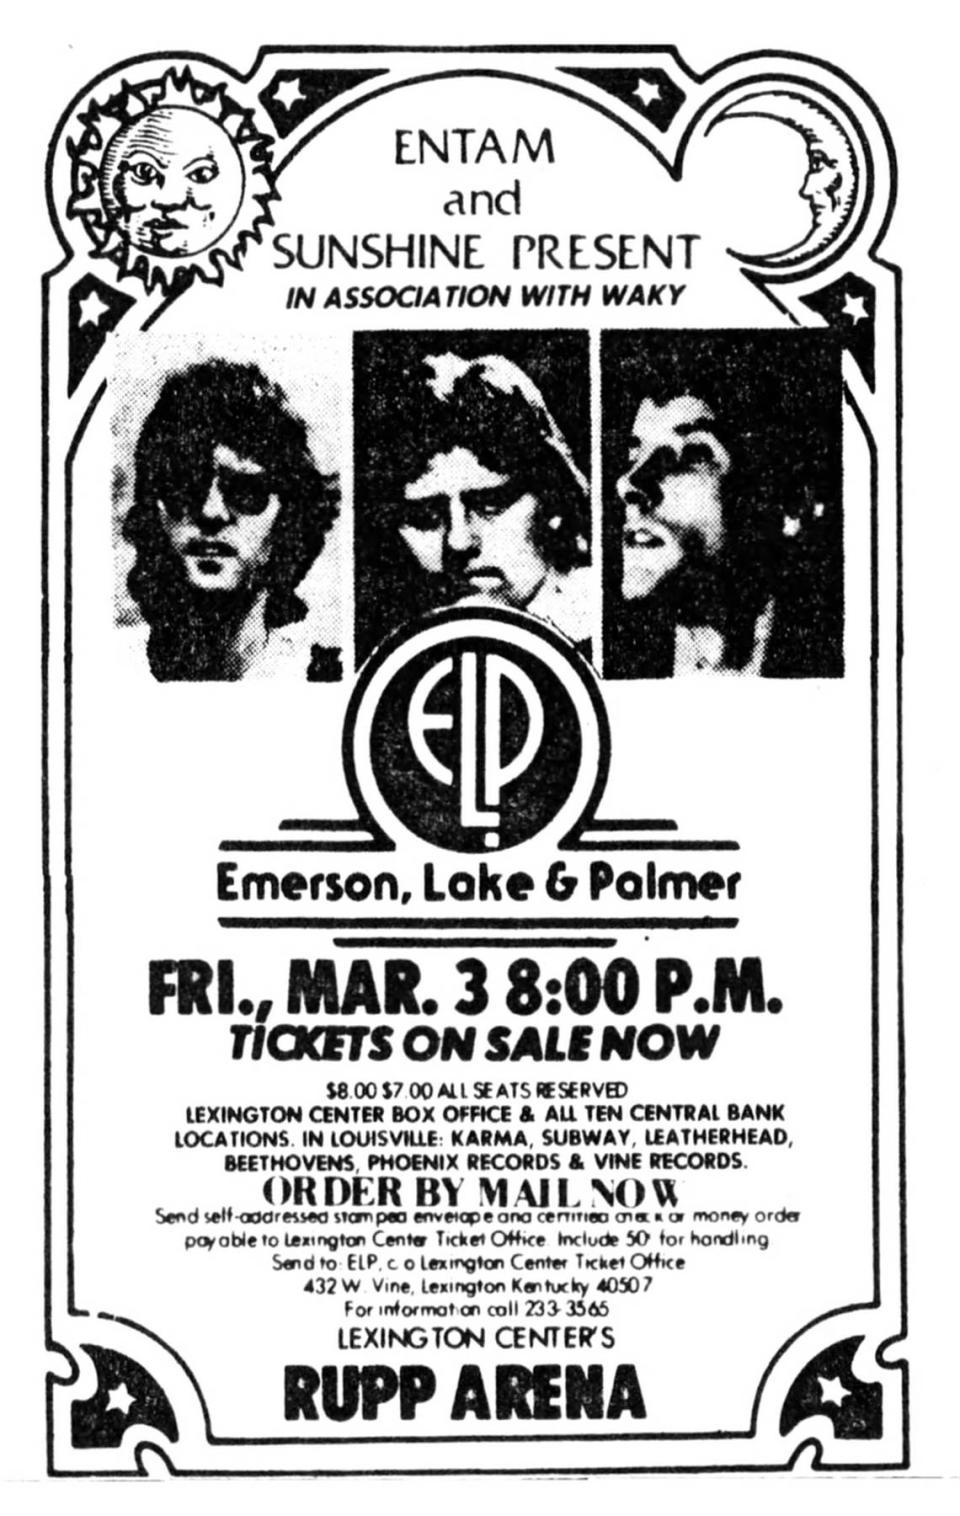 Emerson, Lake & Palmer last played Lexington on March 3, 1978, when they appeared at Rupp Arena.